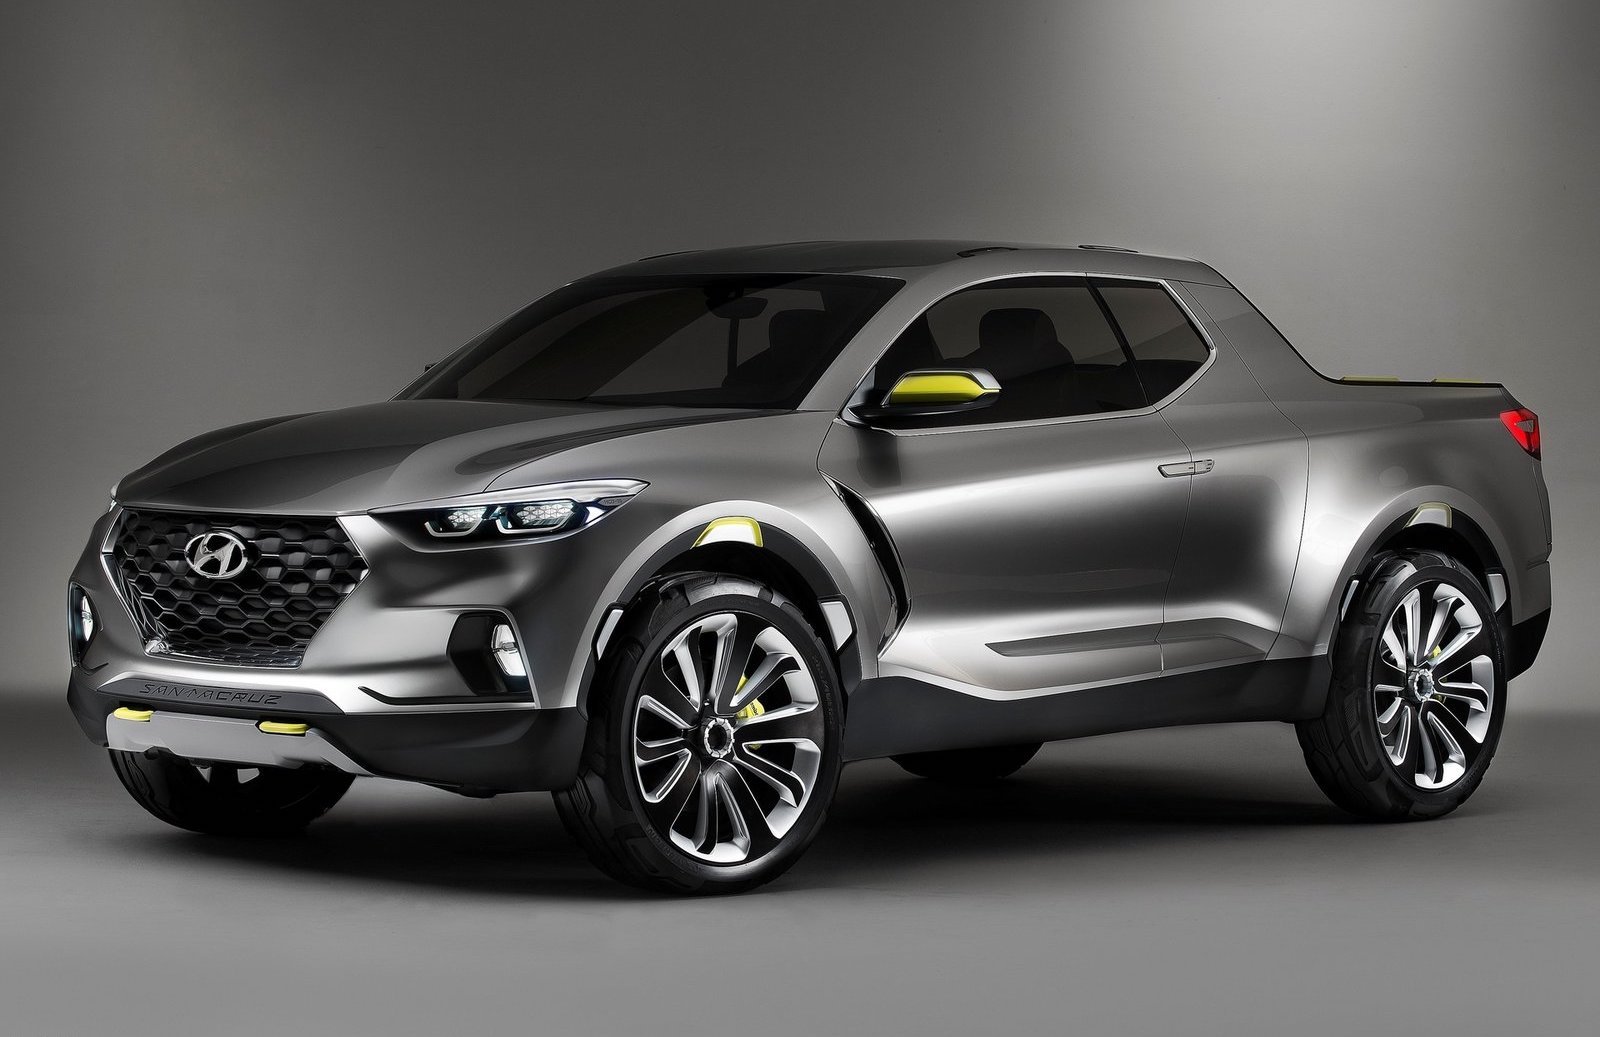 Hyundai pickup design finished, 2020 production likely – report